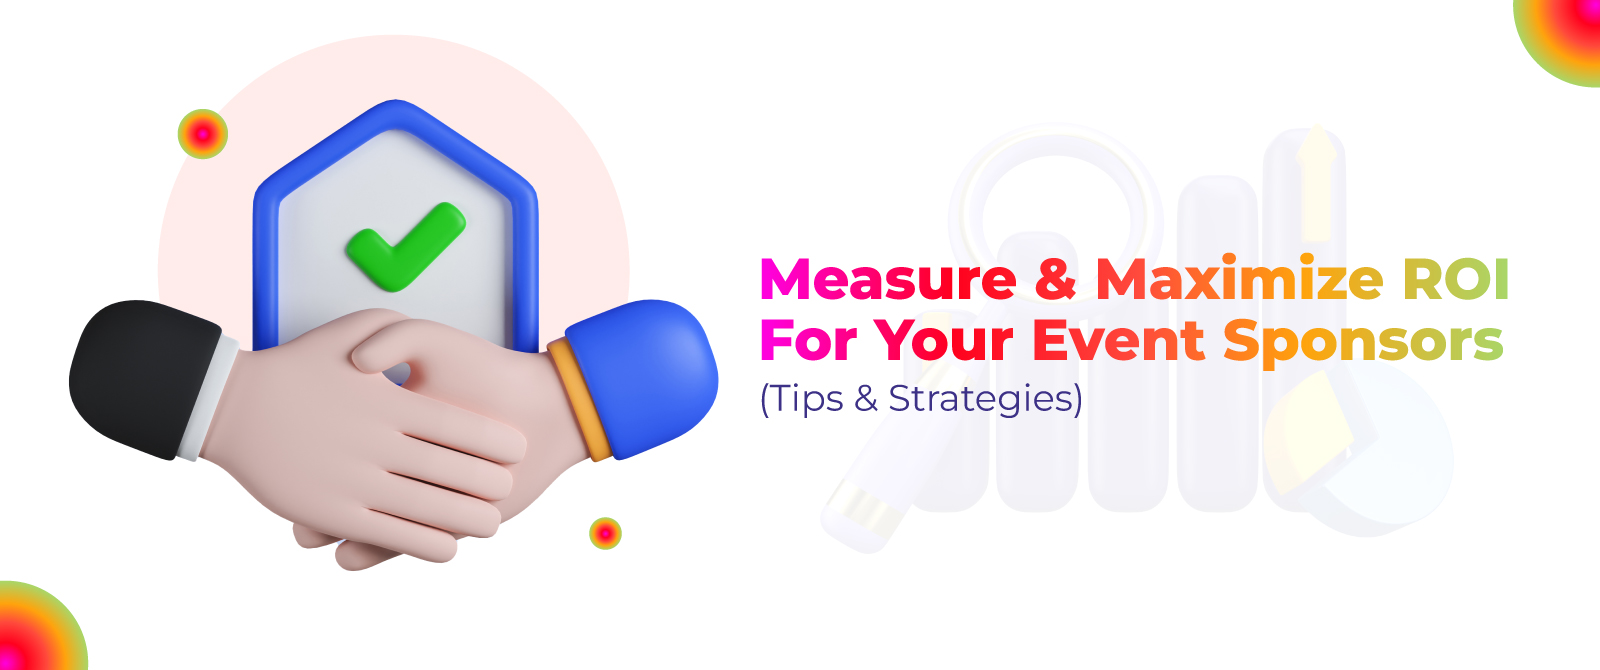 Measure & Maximize ROI For Your Event Sponsors (Tips & Strategies)